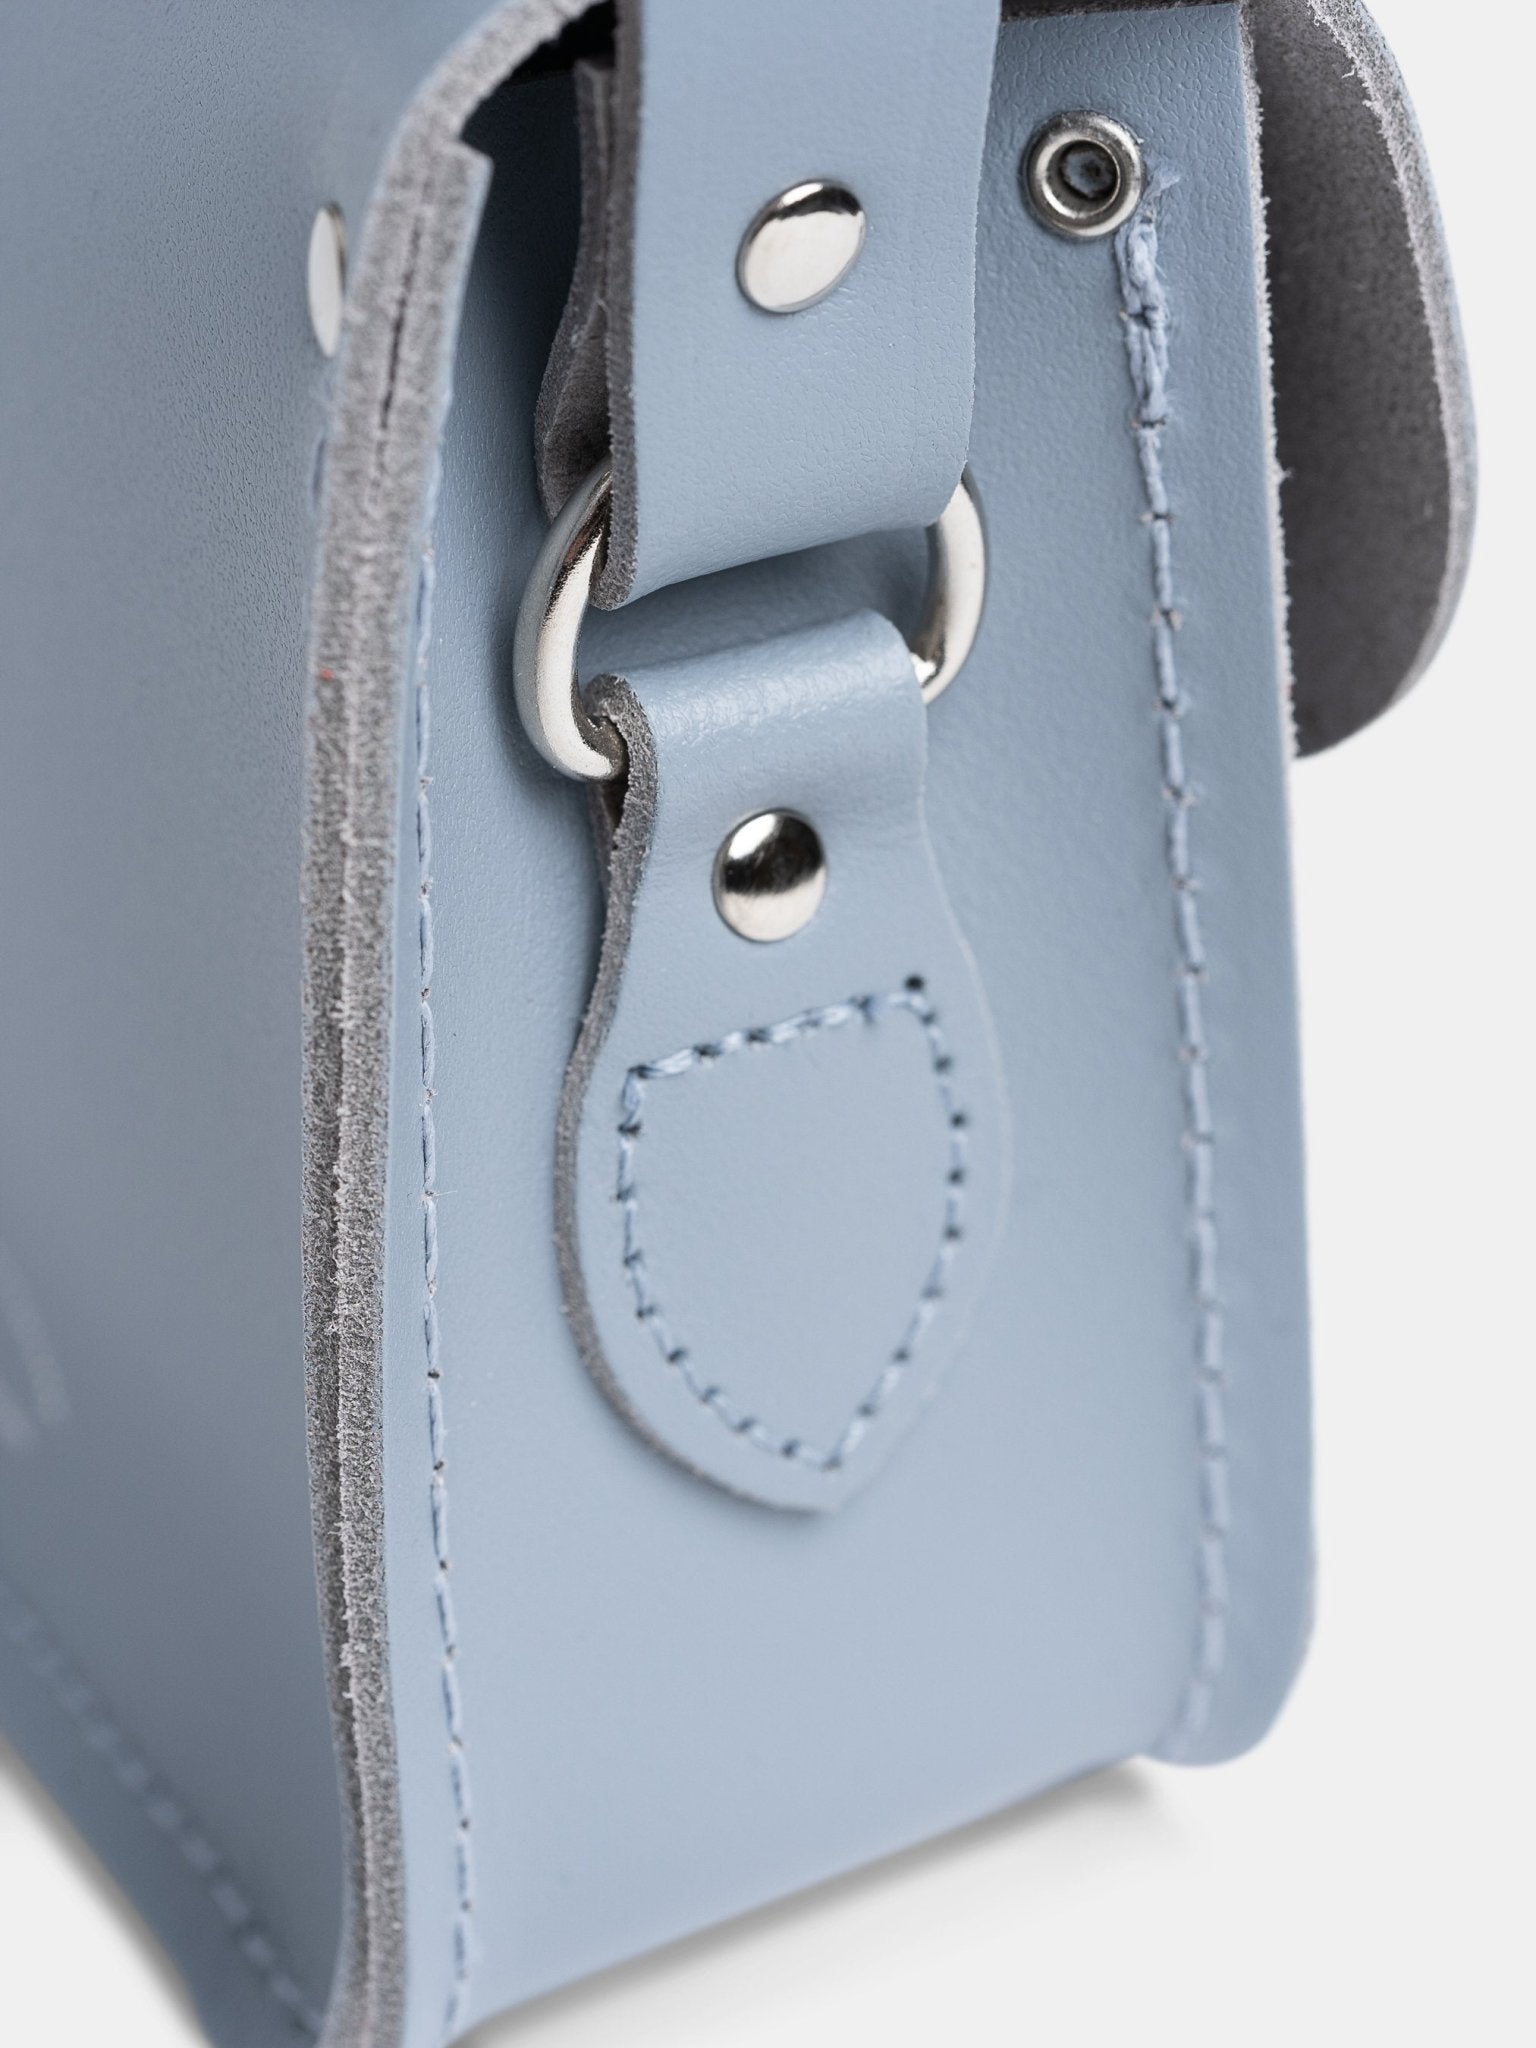 The Little One - French Grey - Cambridge Satchel